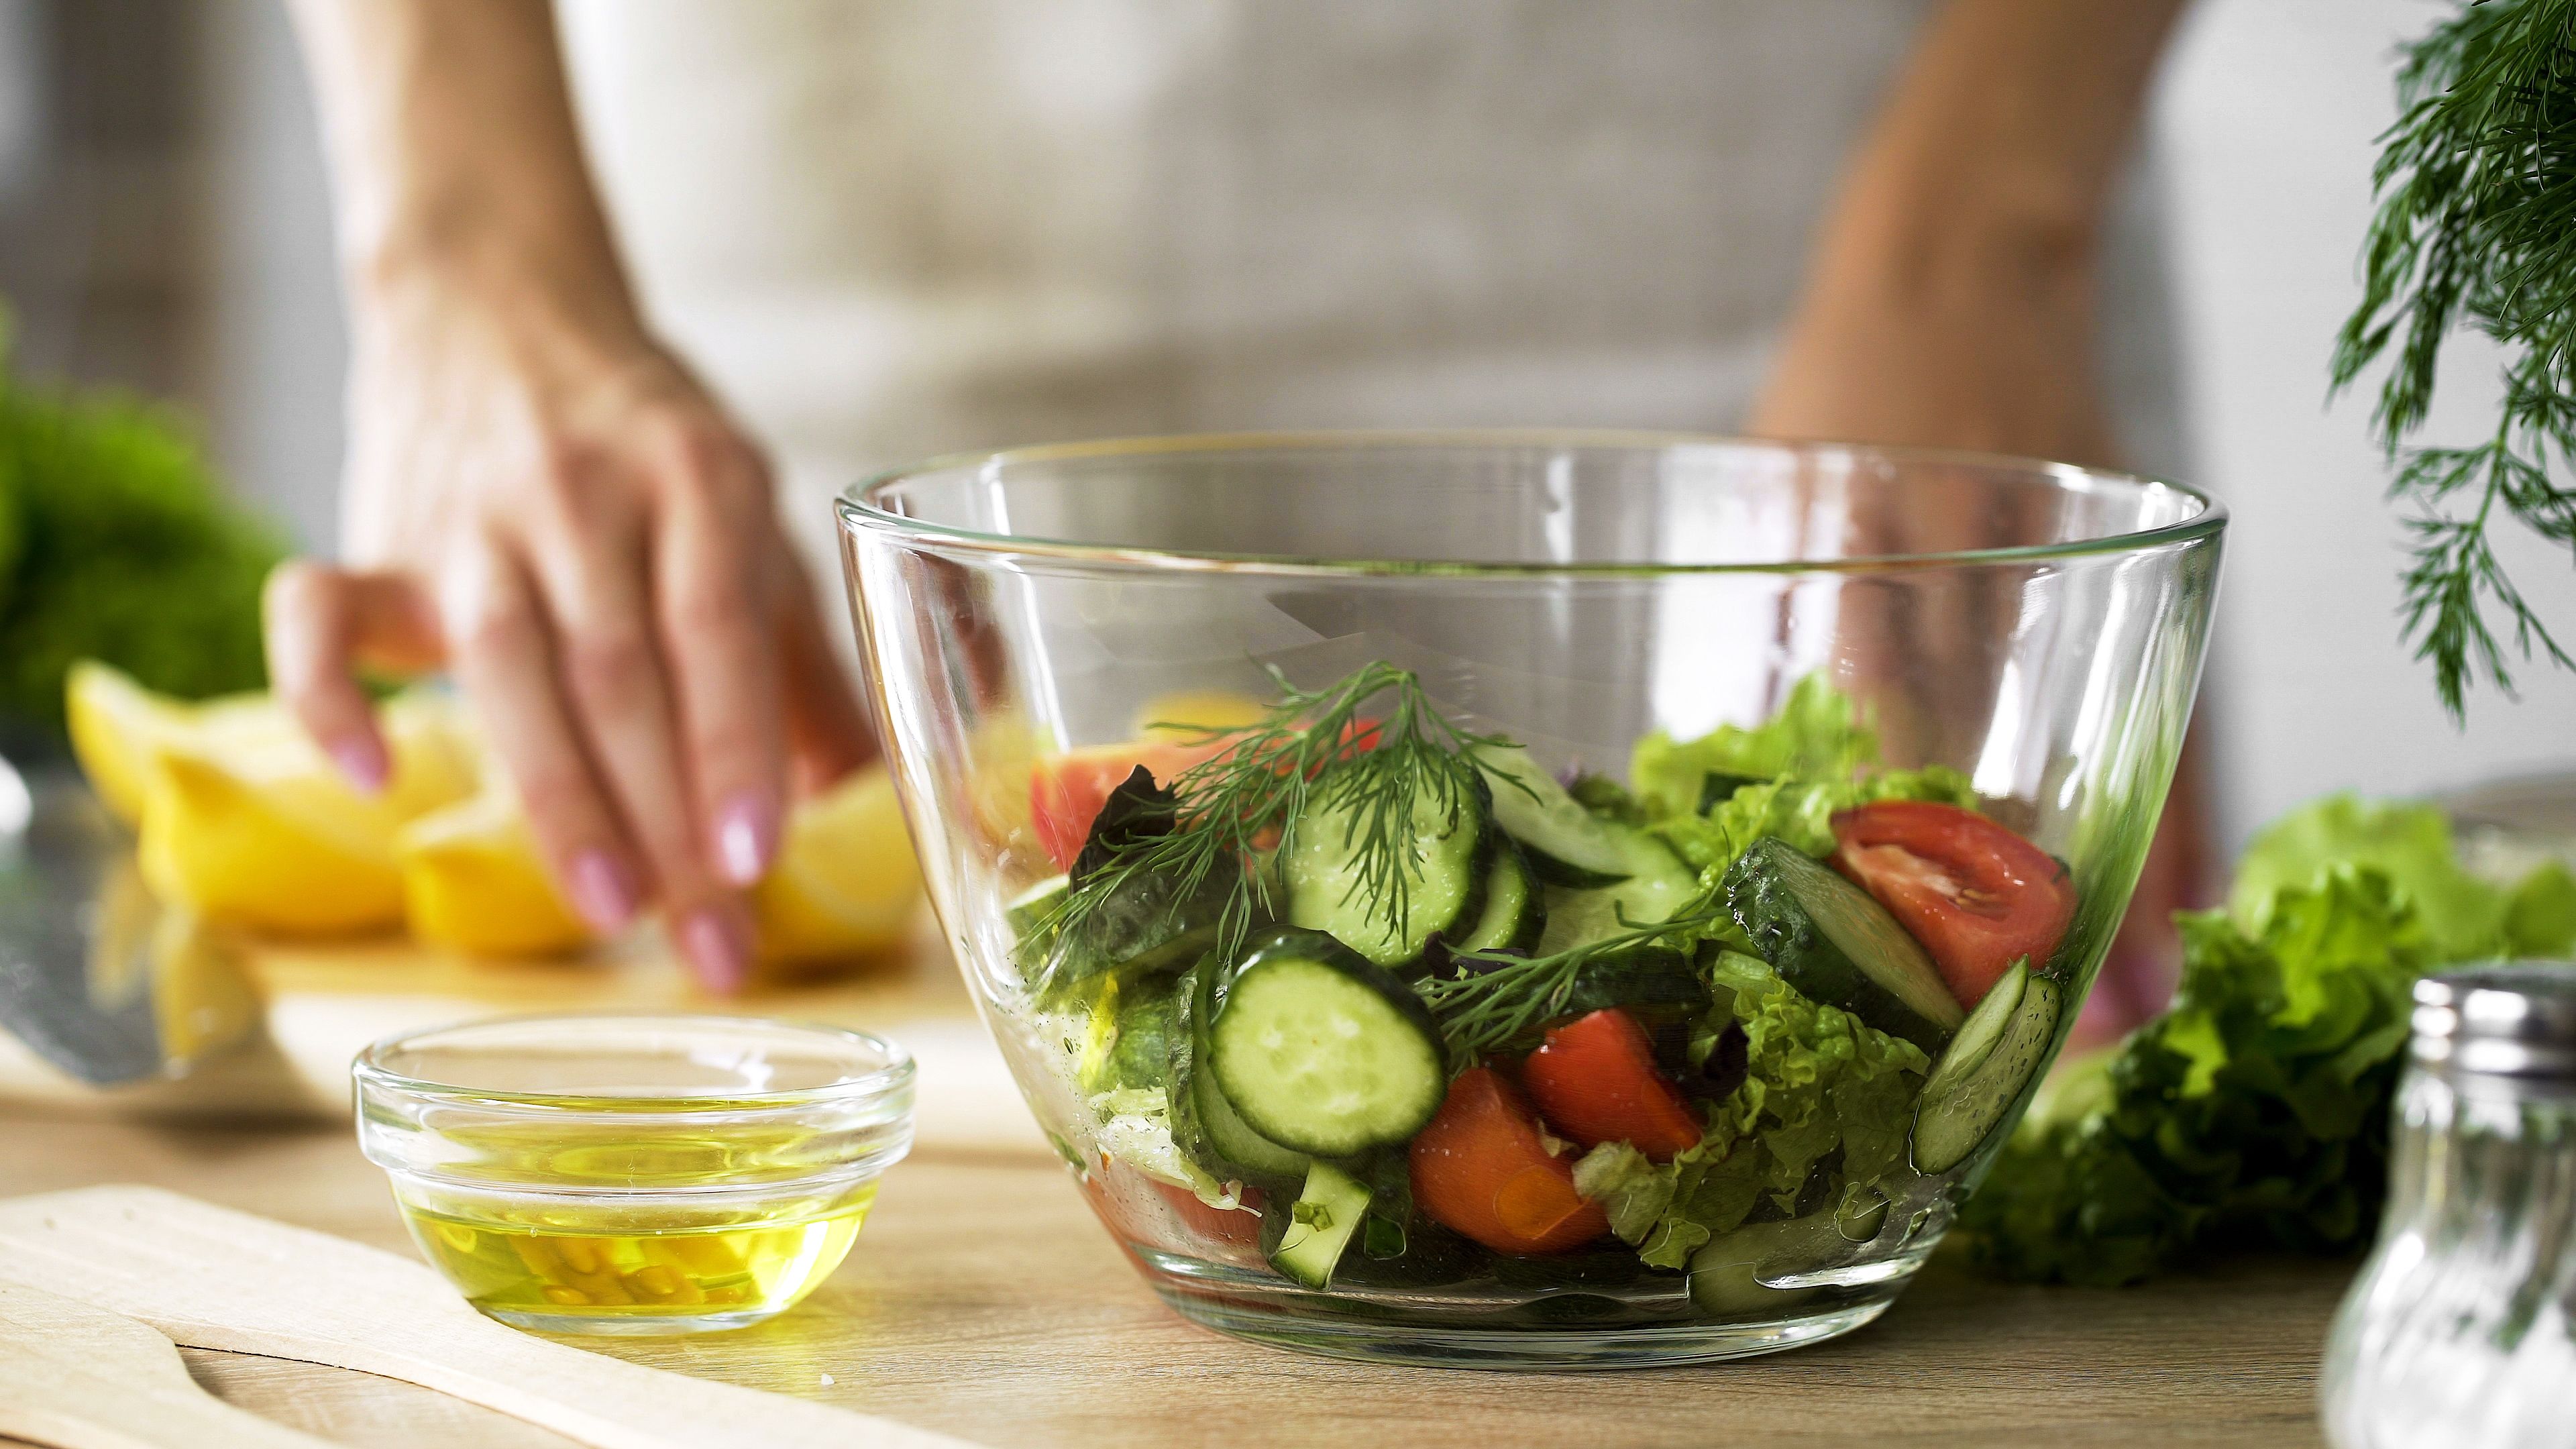 Best Of The Best Salad Dressings: Top 5 Sauces Most Recommended For Your  Leafy Greens - Study Finds